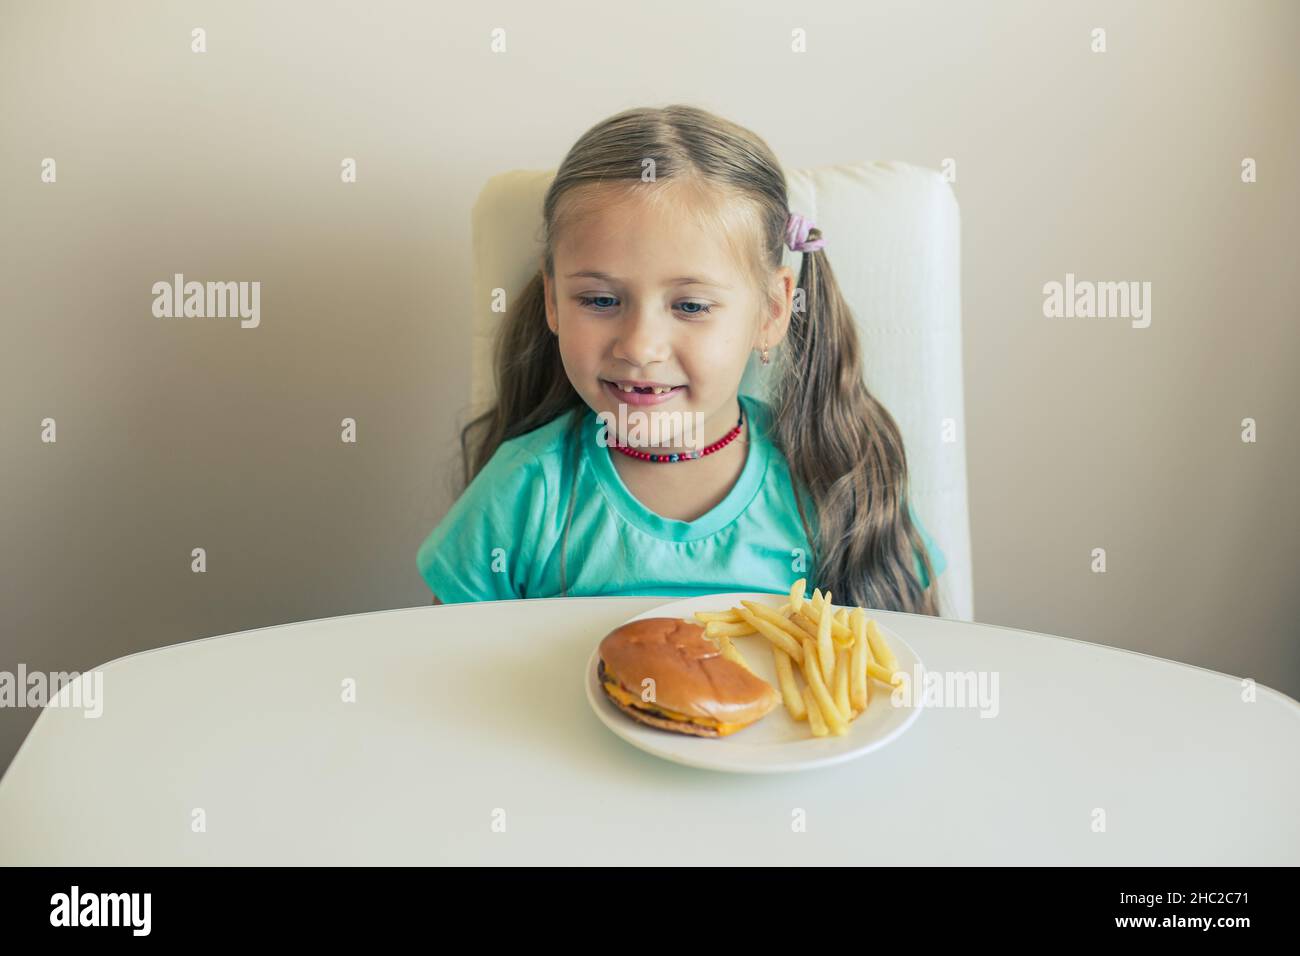 Smiling Little girl seats by the table with hamburger and French fries dish Stock Photo